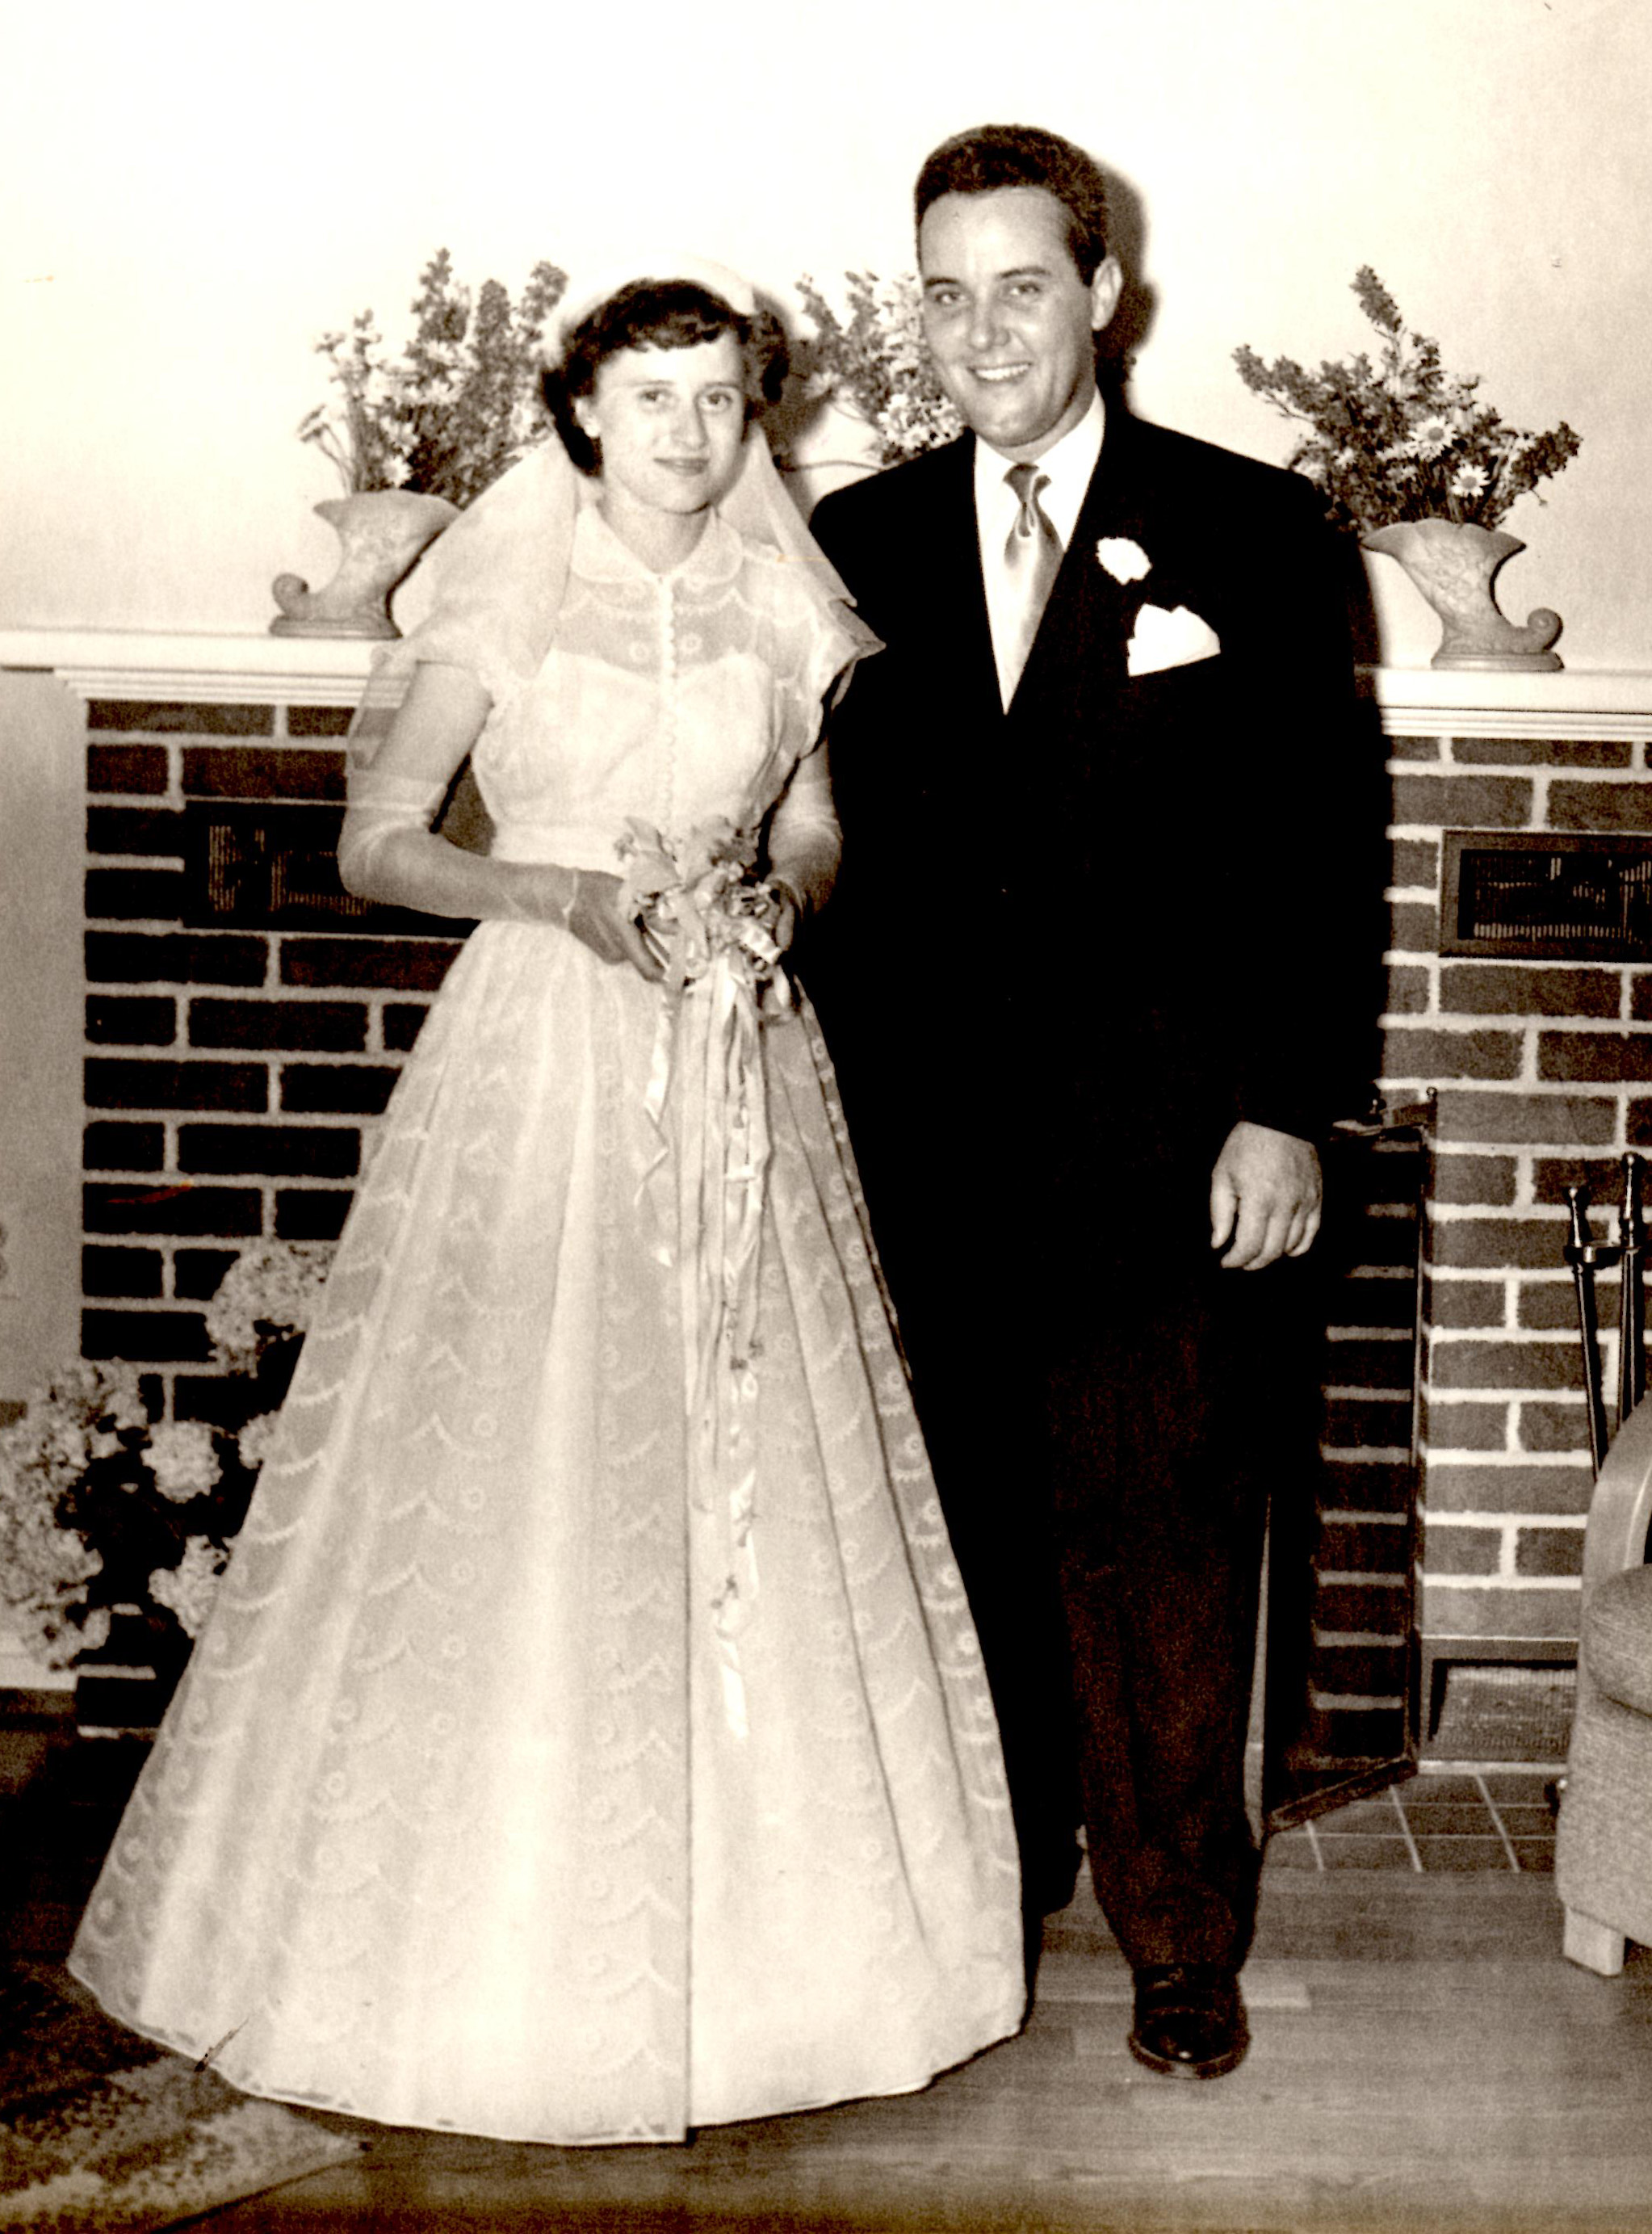 Helen and George Pratte, 1949